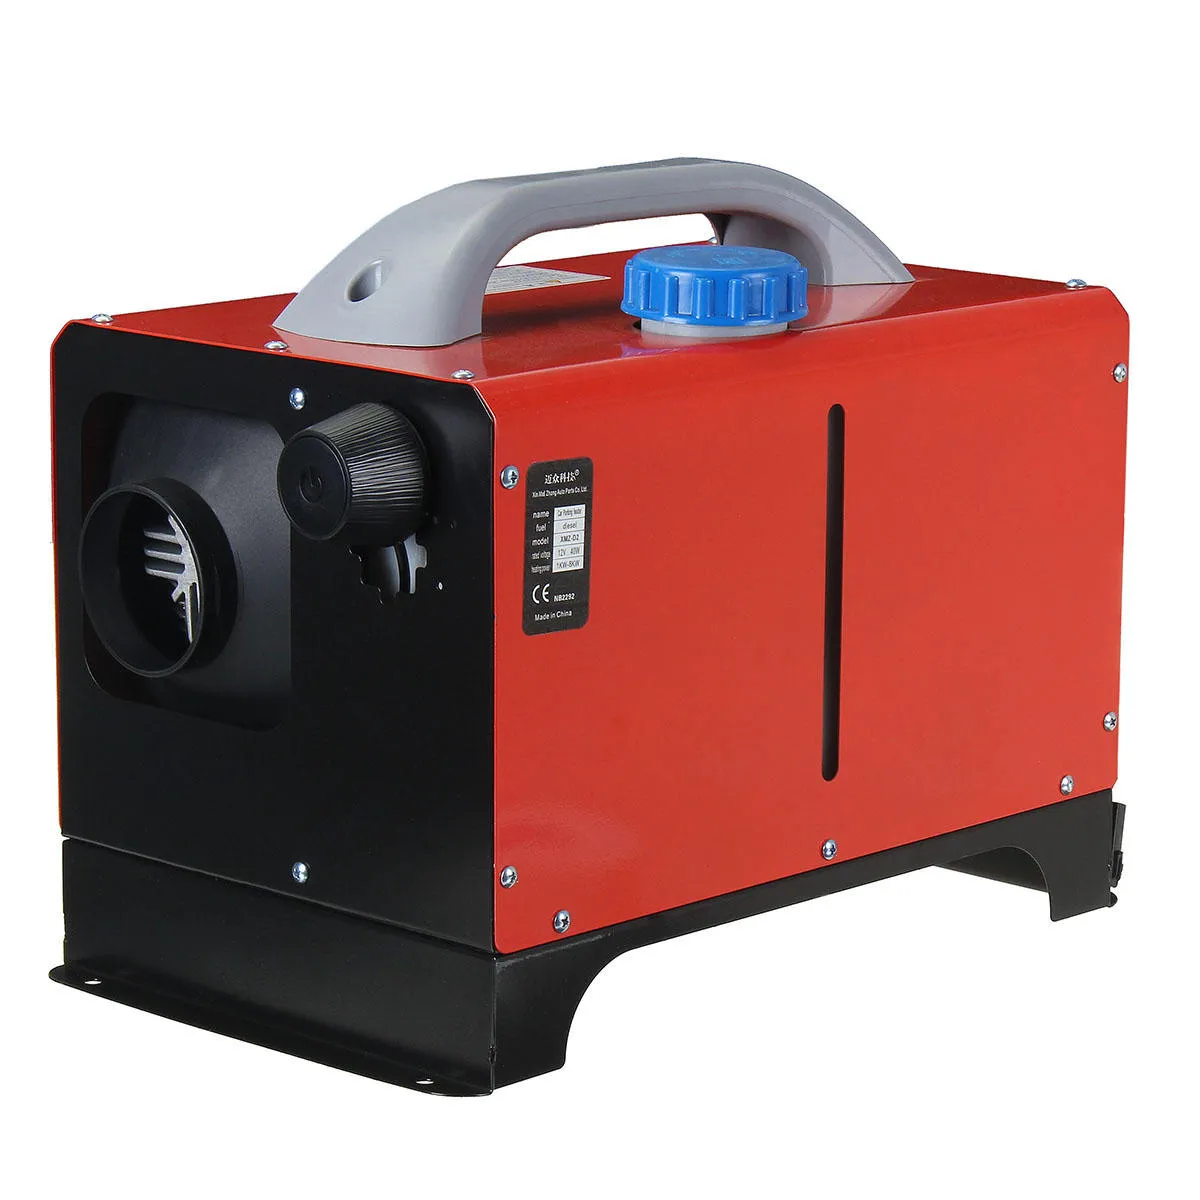 12V 8KW Red Diesel Air Blower Heater Price With Automatic Room Temperature  Control And Pre Set Facilities For Car Parking From Gearbestshop, $88.56